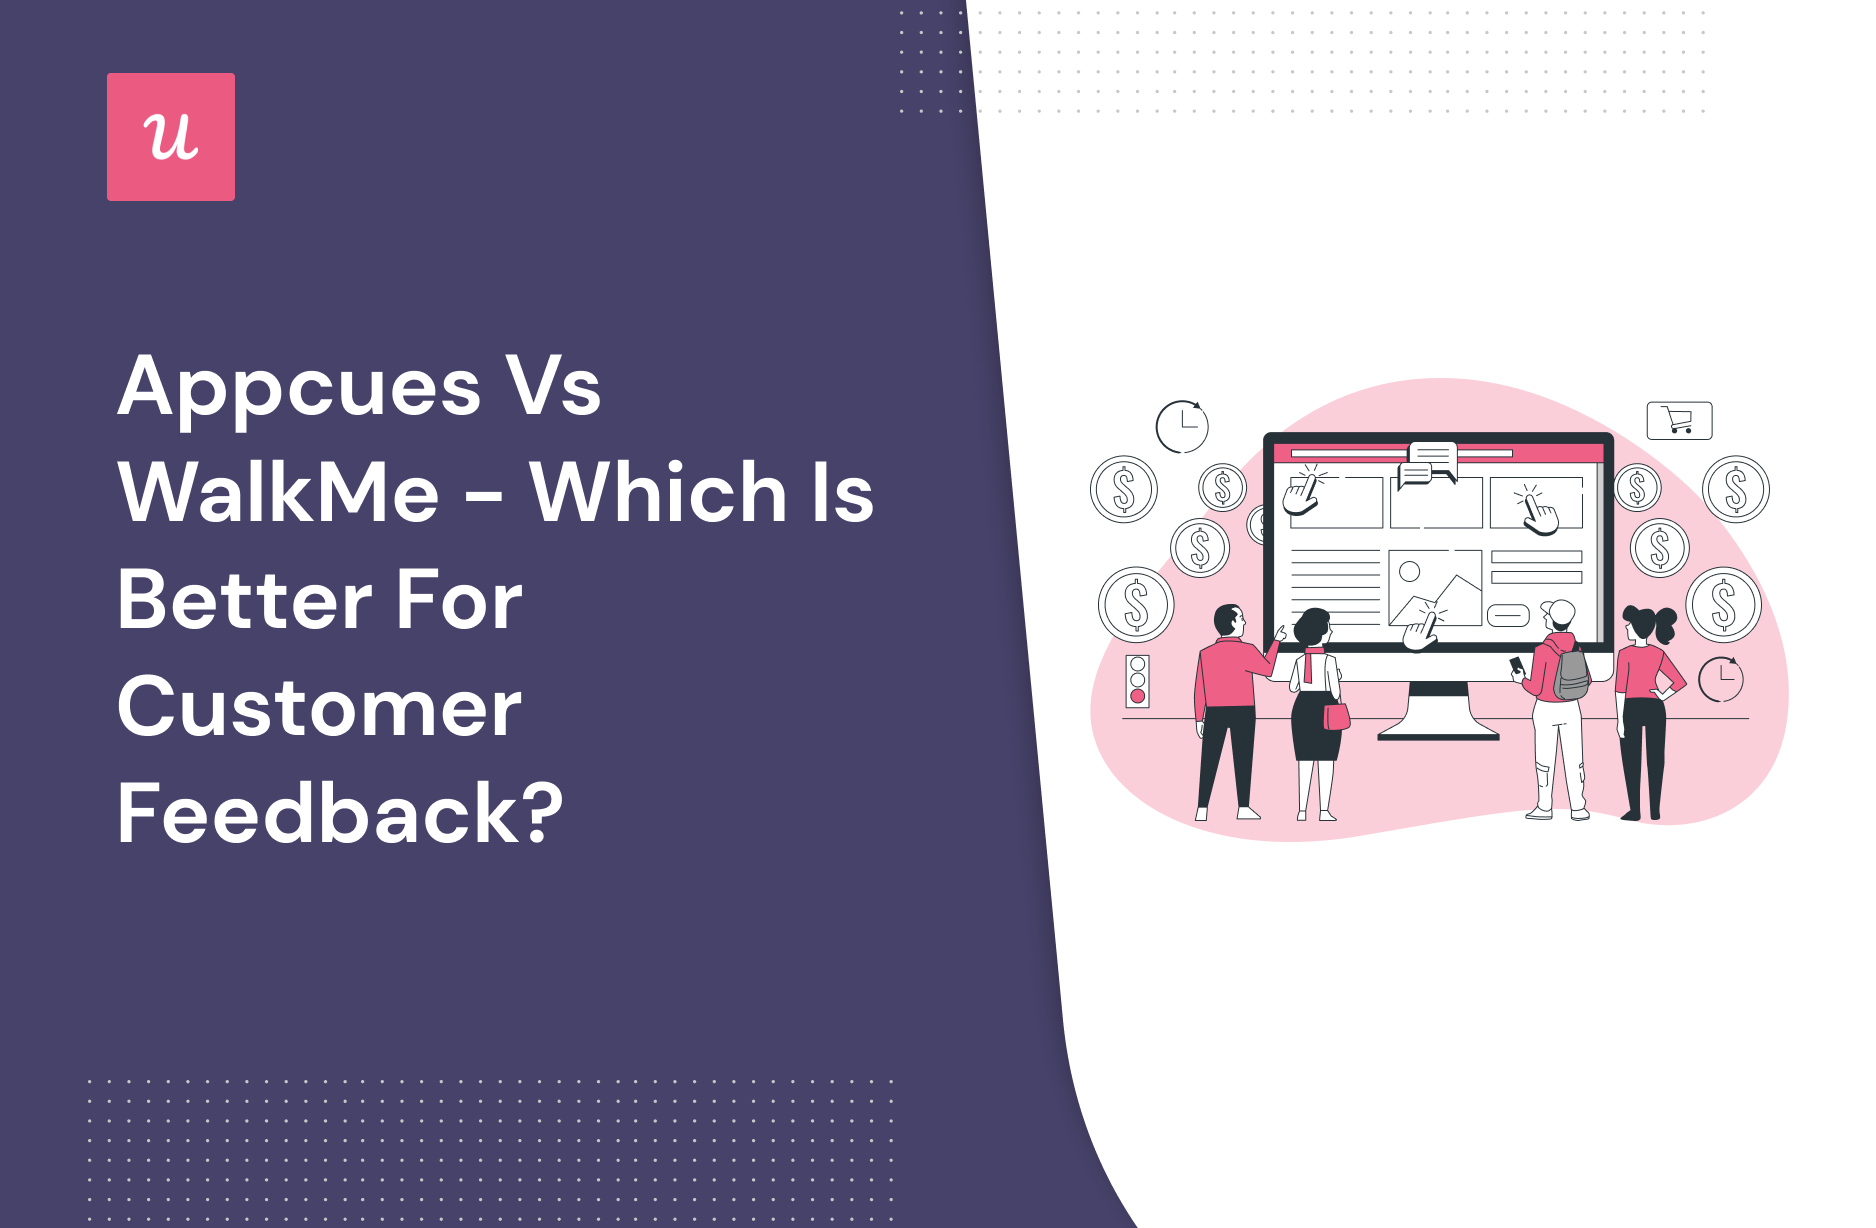 Appcues vs Walkme - which is better for Customer Feedback